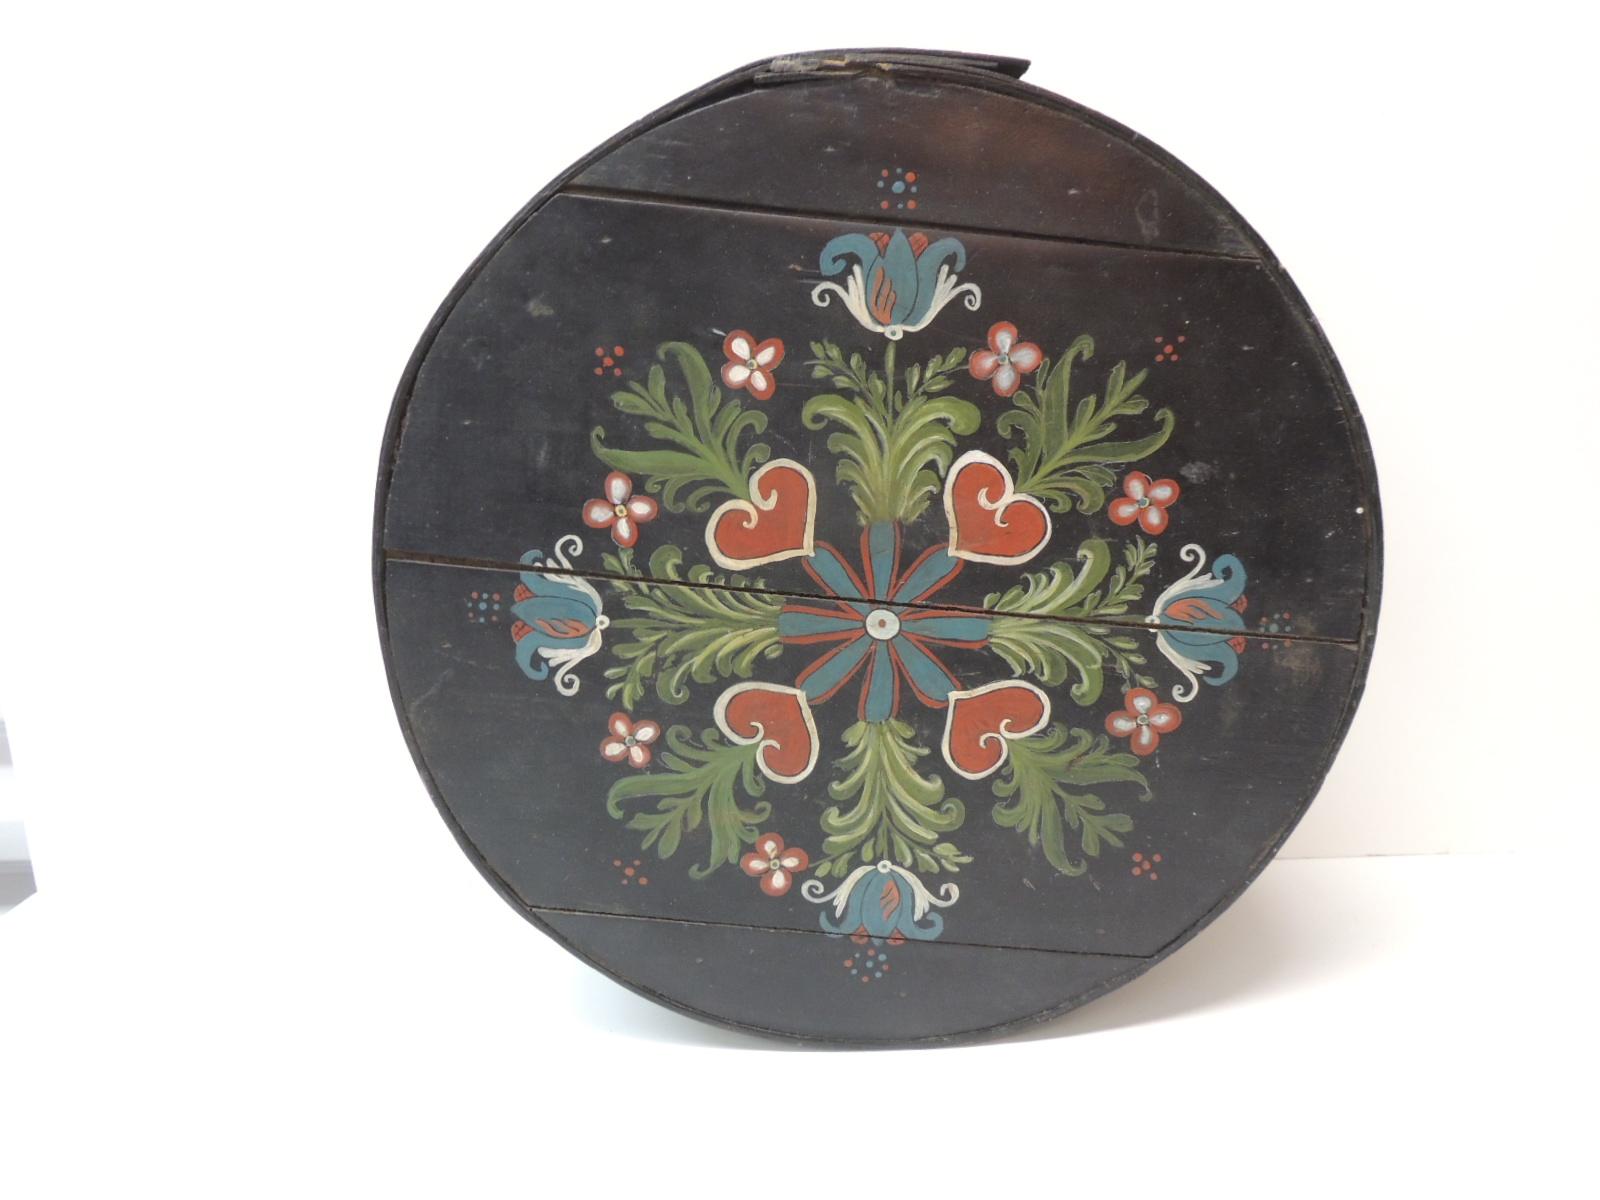 Folk Art hand painted round box
(Originally a cheese box)
Black mate paint with floral and heart motifs on the top and floral bouquets all around the box.
Palette in shades of blue, white, red, hunter green and black
Size: 15